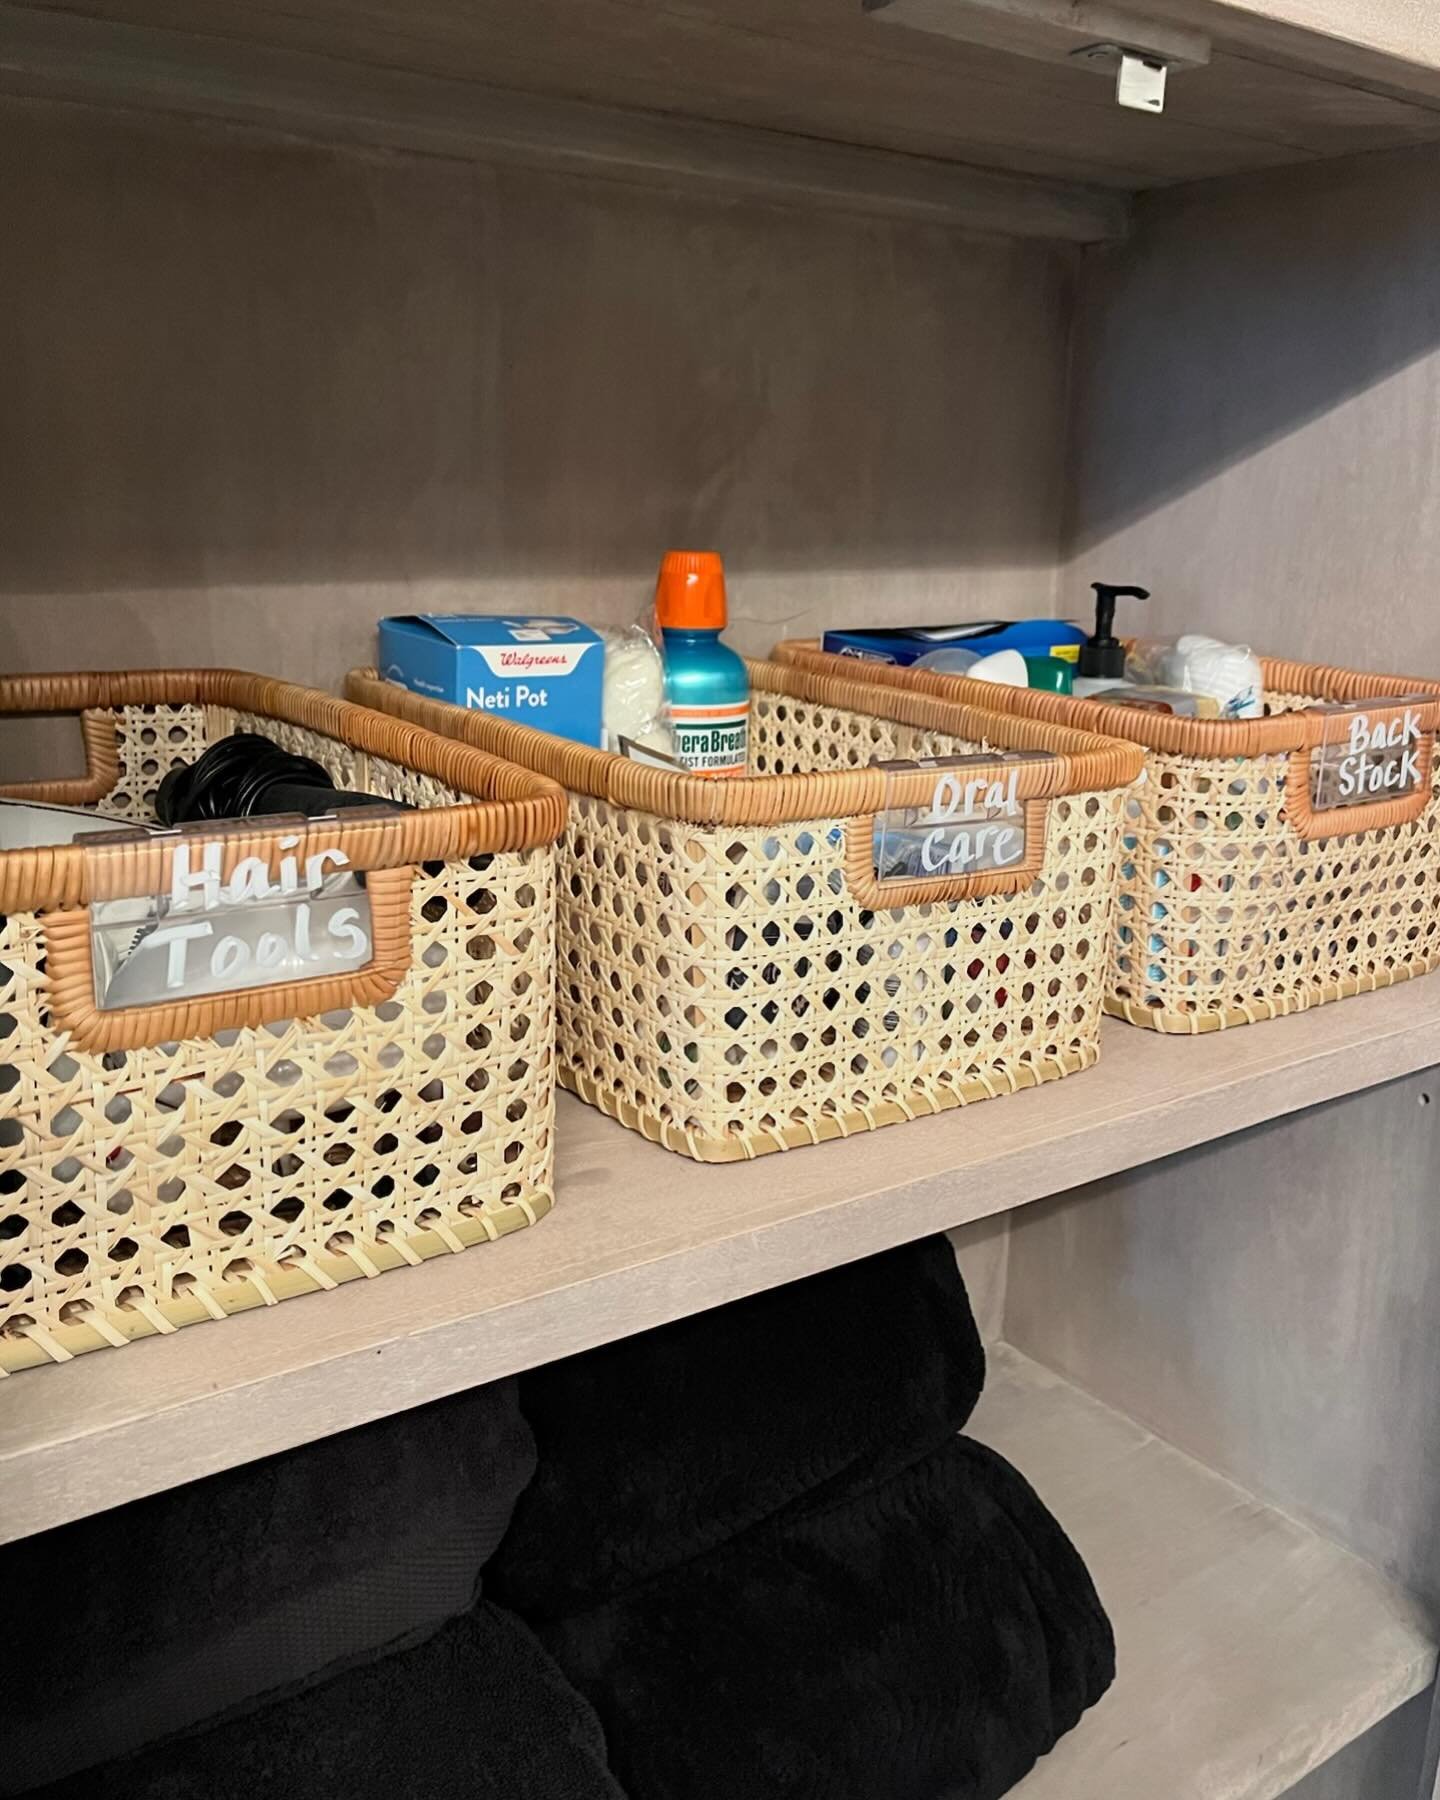 There is no such thing as too many cosmetics, right?? But storing all of products can be a challenge&hellip;.

We love the storage solutions used in our latest bathroom refresh that making finding and using all of the things easy!

#rocyourspace #hom